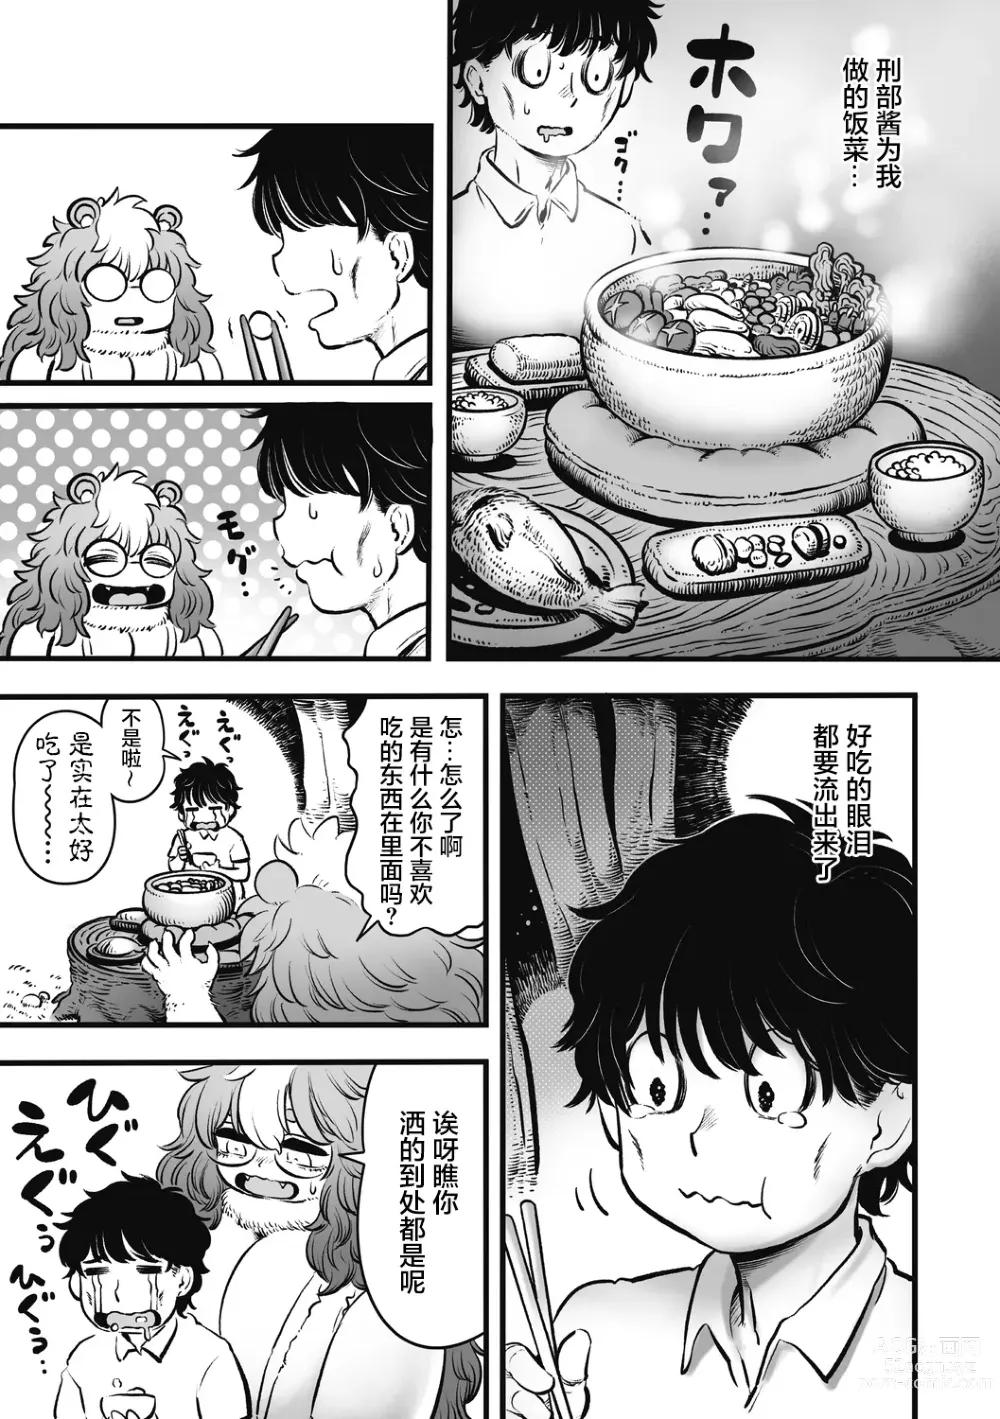 Page 8 of doujinshi 刑部河田ひより（肉包汉化组）（Chinese）